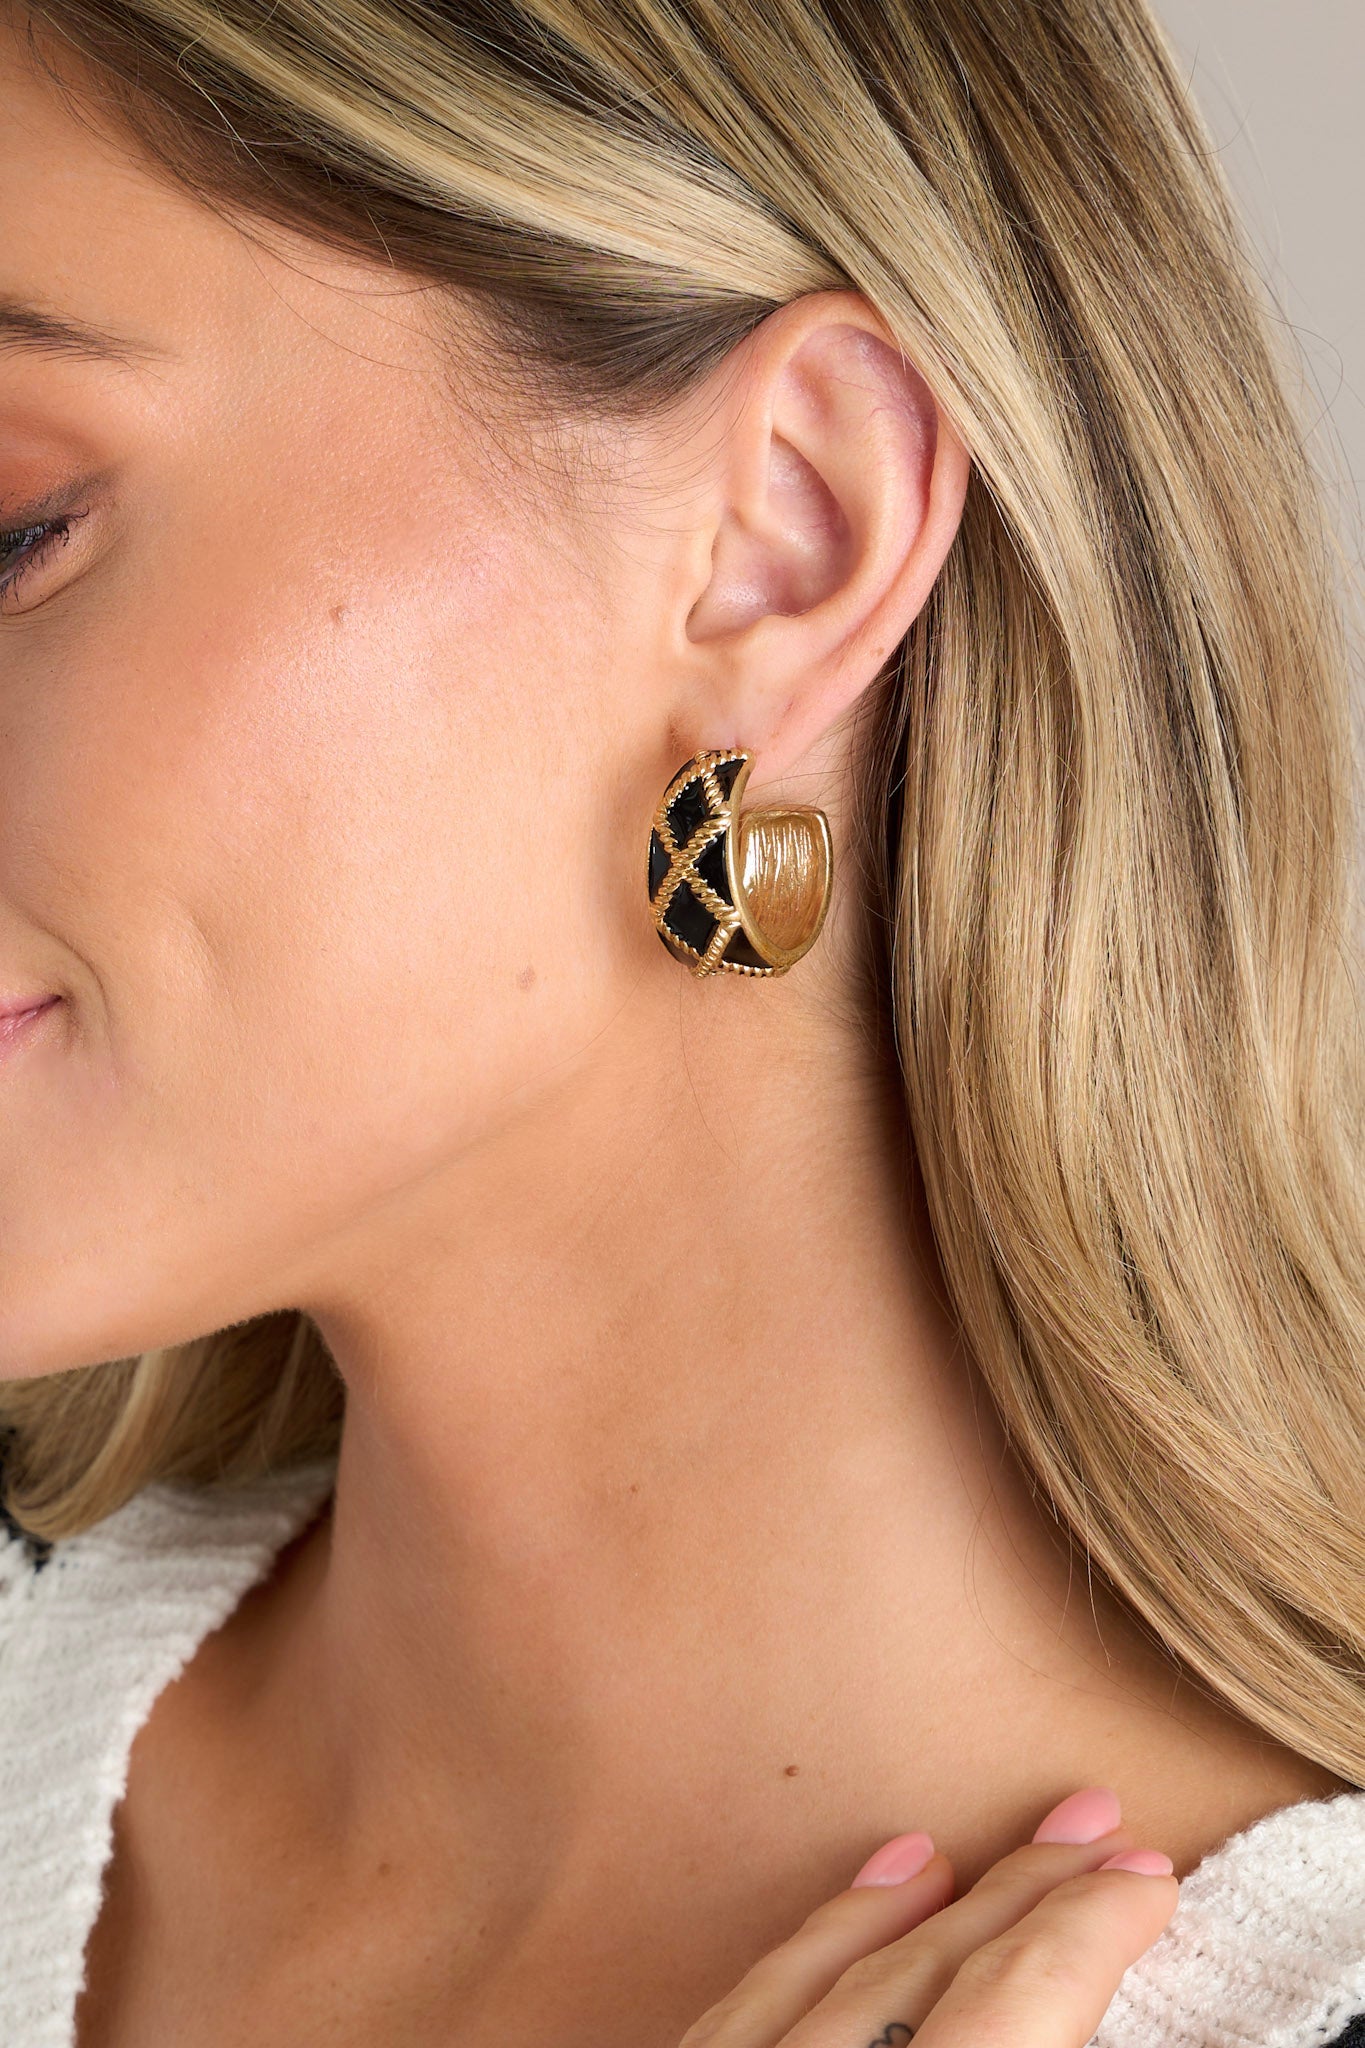 These black earrings feature an incomplete hoop design, a gold textured design, and secure post backings.